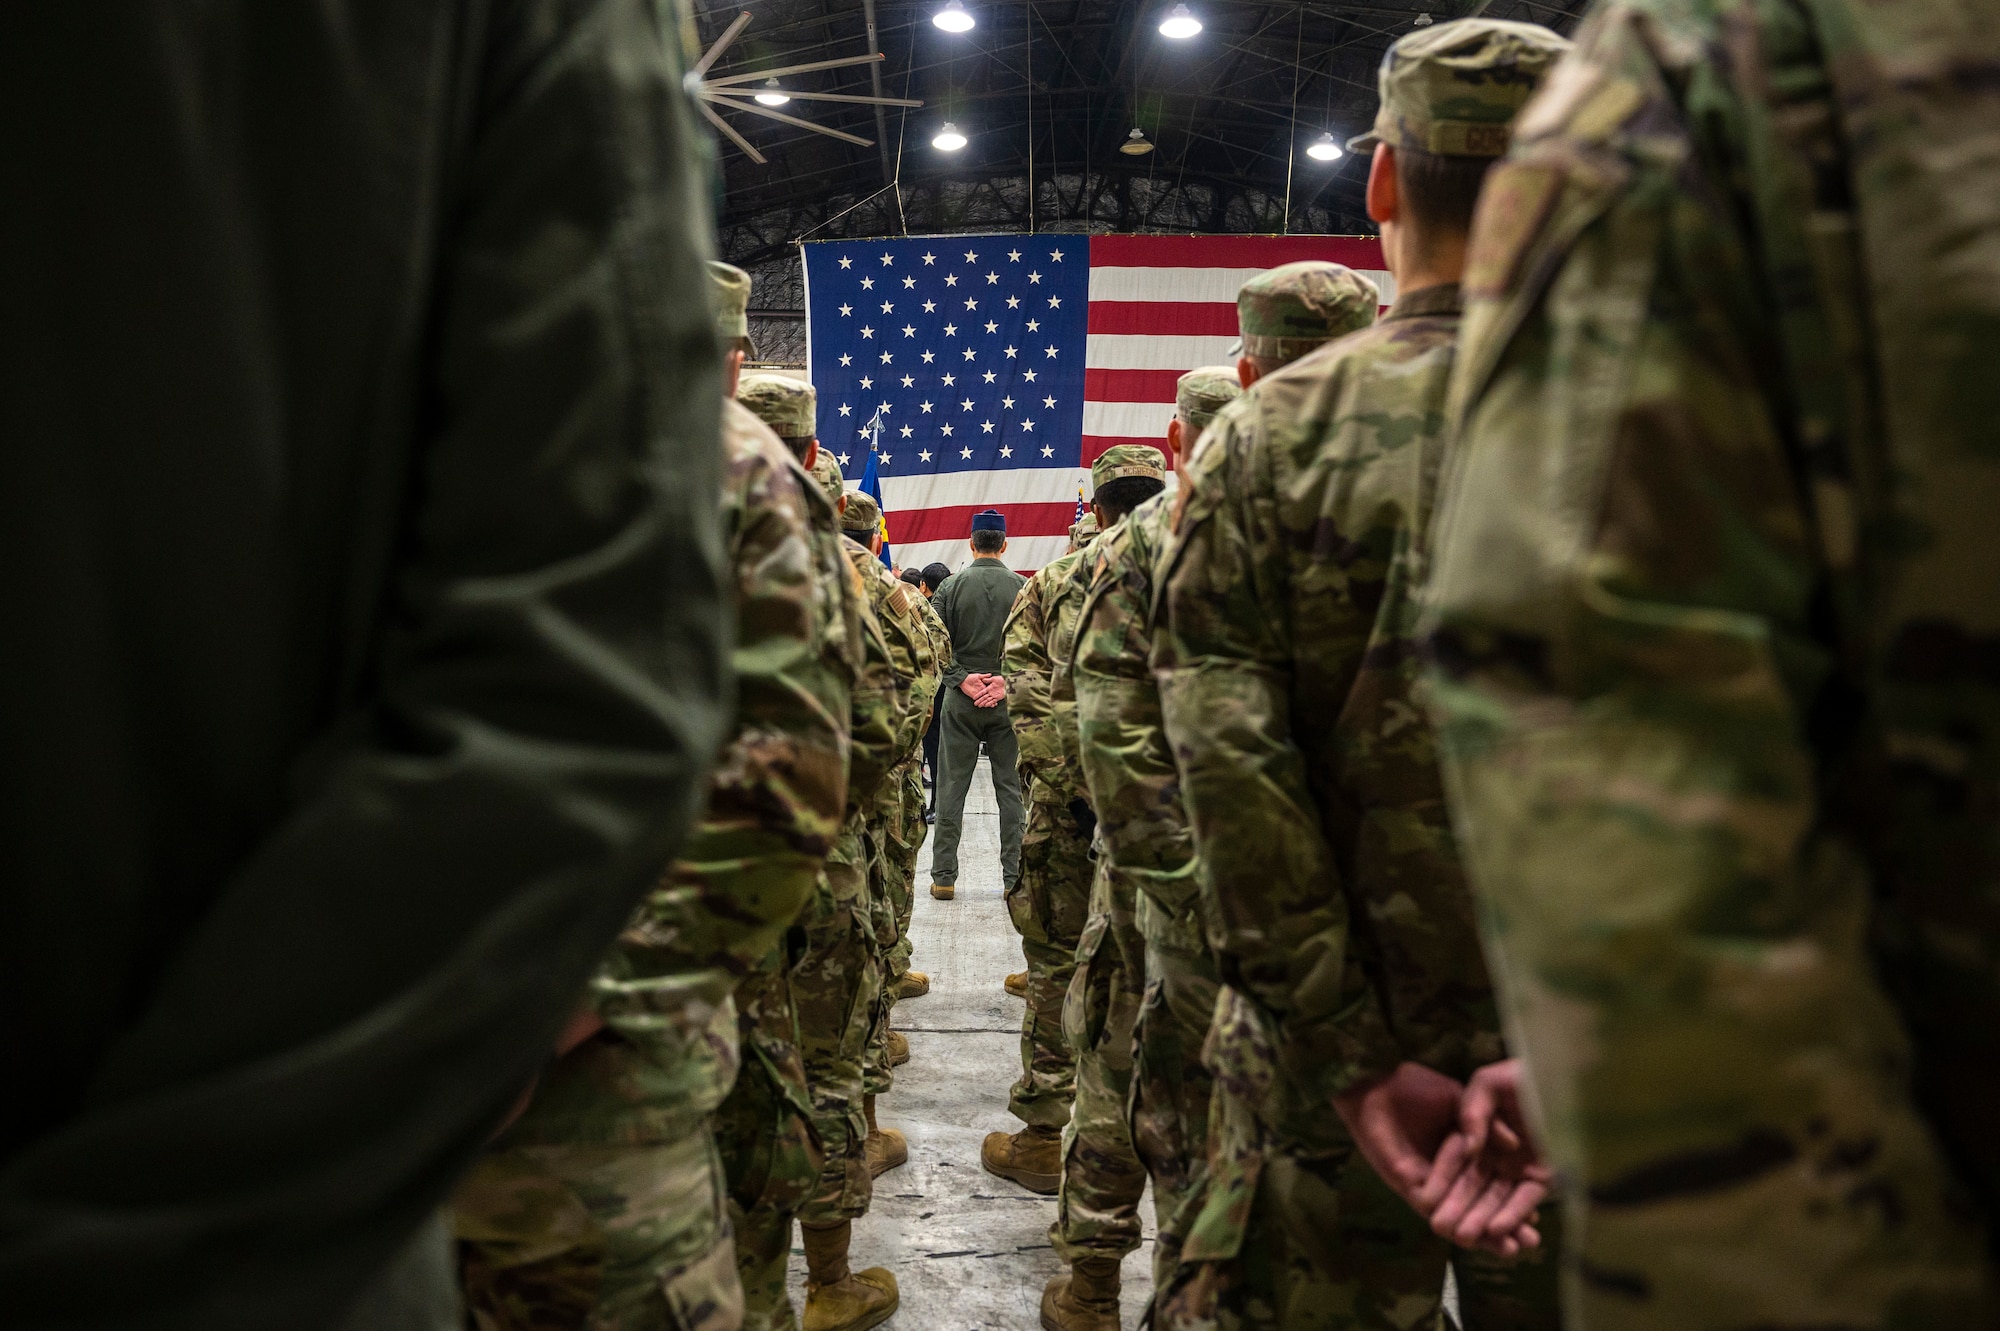 U.S. service members stand in formation, appearing from behind at below shoulder height, with a large U.S. flag in the backdrop.